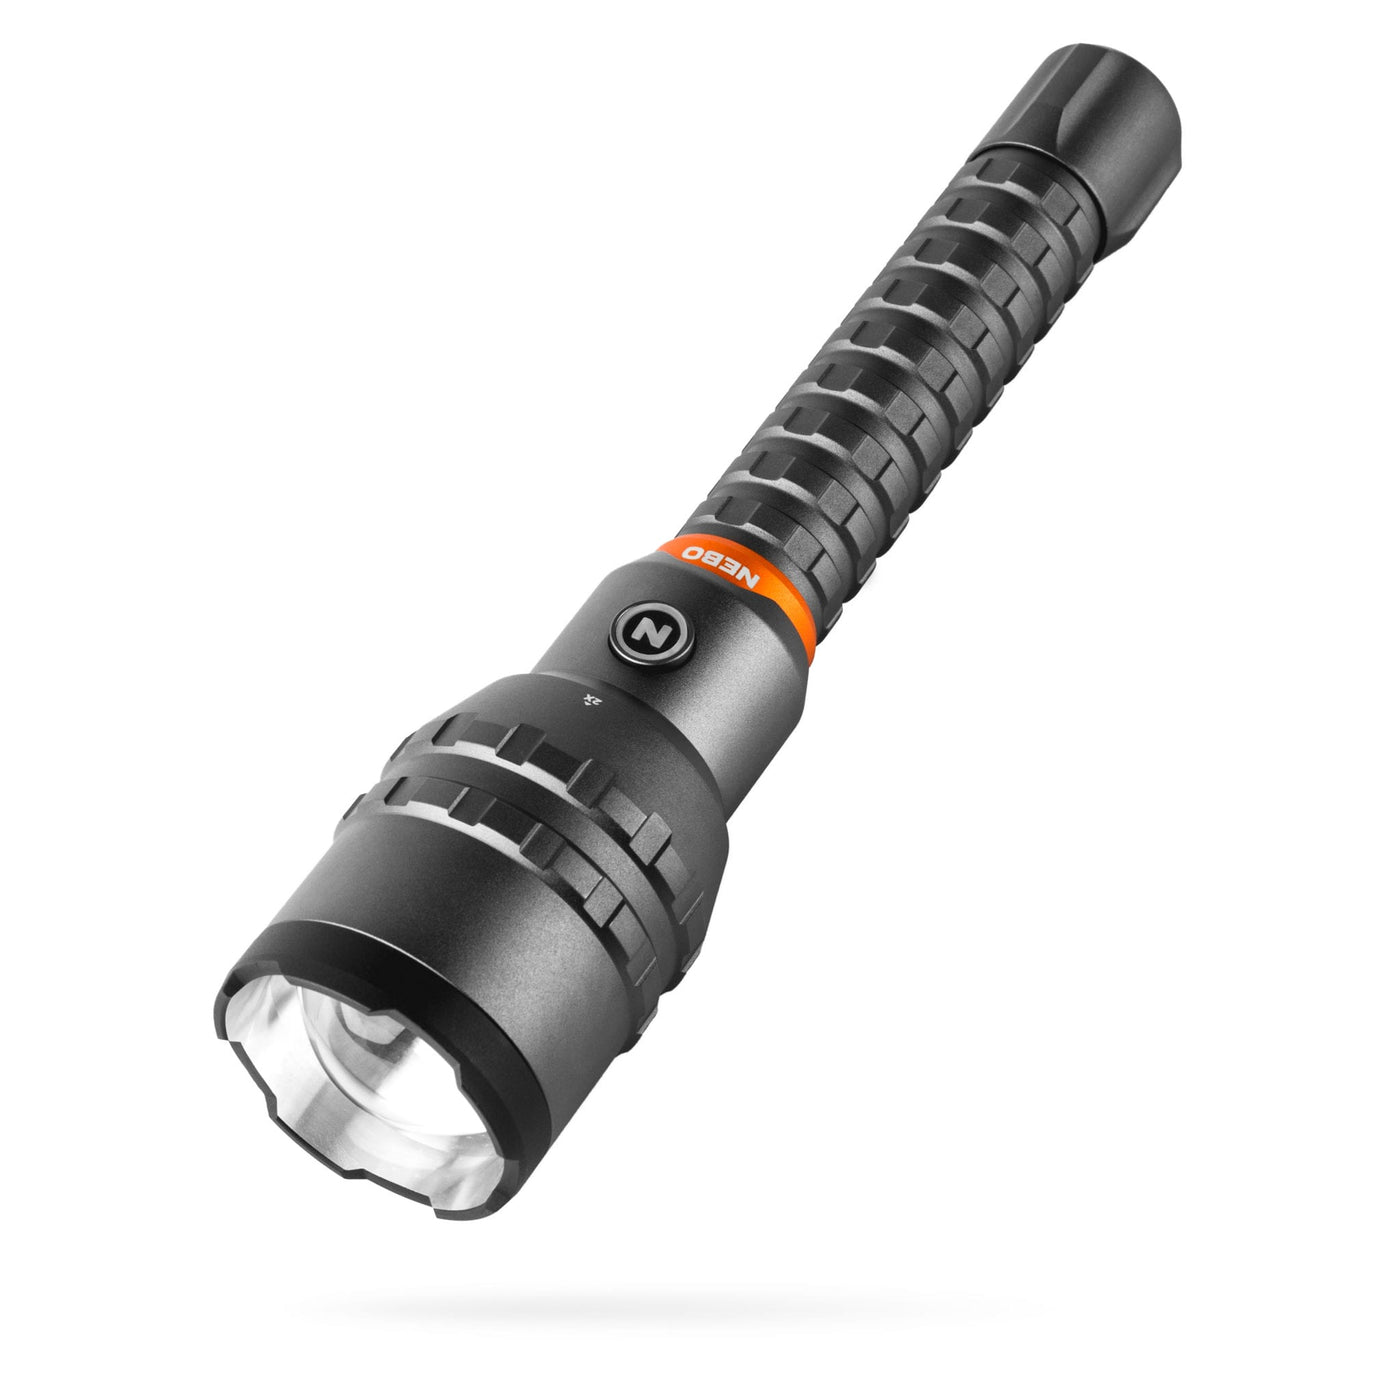 At Nebo Tools, we continually innovate so that we can offer the highest quality LED lighting products at the best price. Rechargeable, waterproof and extremely powerful, the 12K torch can twist to adjust light beam from flood light to spot light. The 5 impressive light modes are seamlessly transitioned through Smart Power Control. The backlit button serves as a power, battery and charging indicator. This torch can can charged using a USB charger and/or powerbank.